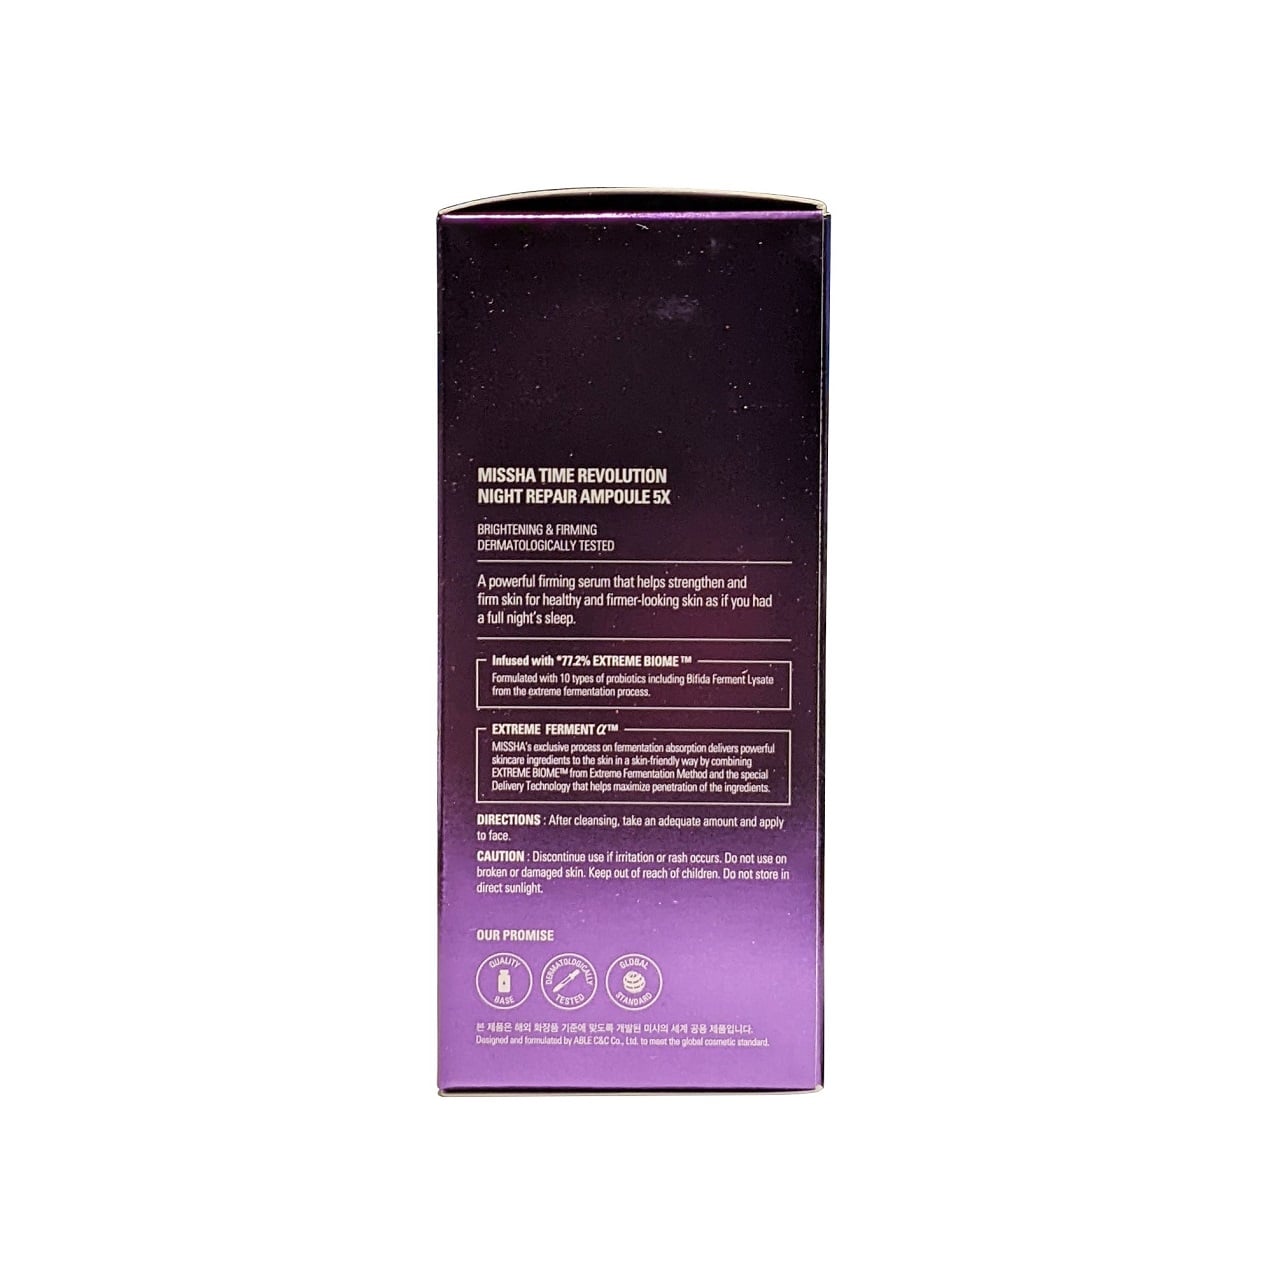 Directions and caution for MISSHA Time Revolution Night Ampoule 5X (50 mL) in English